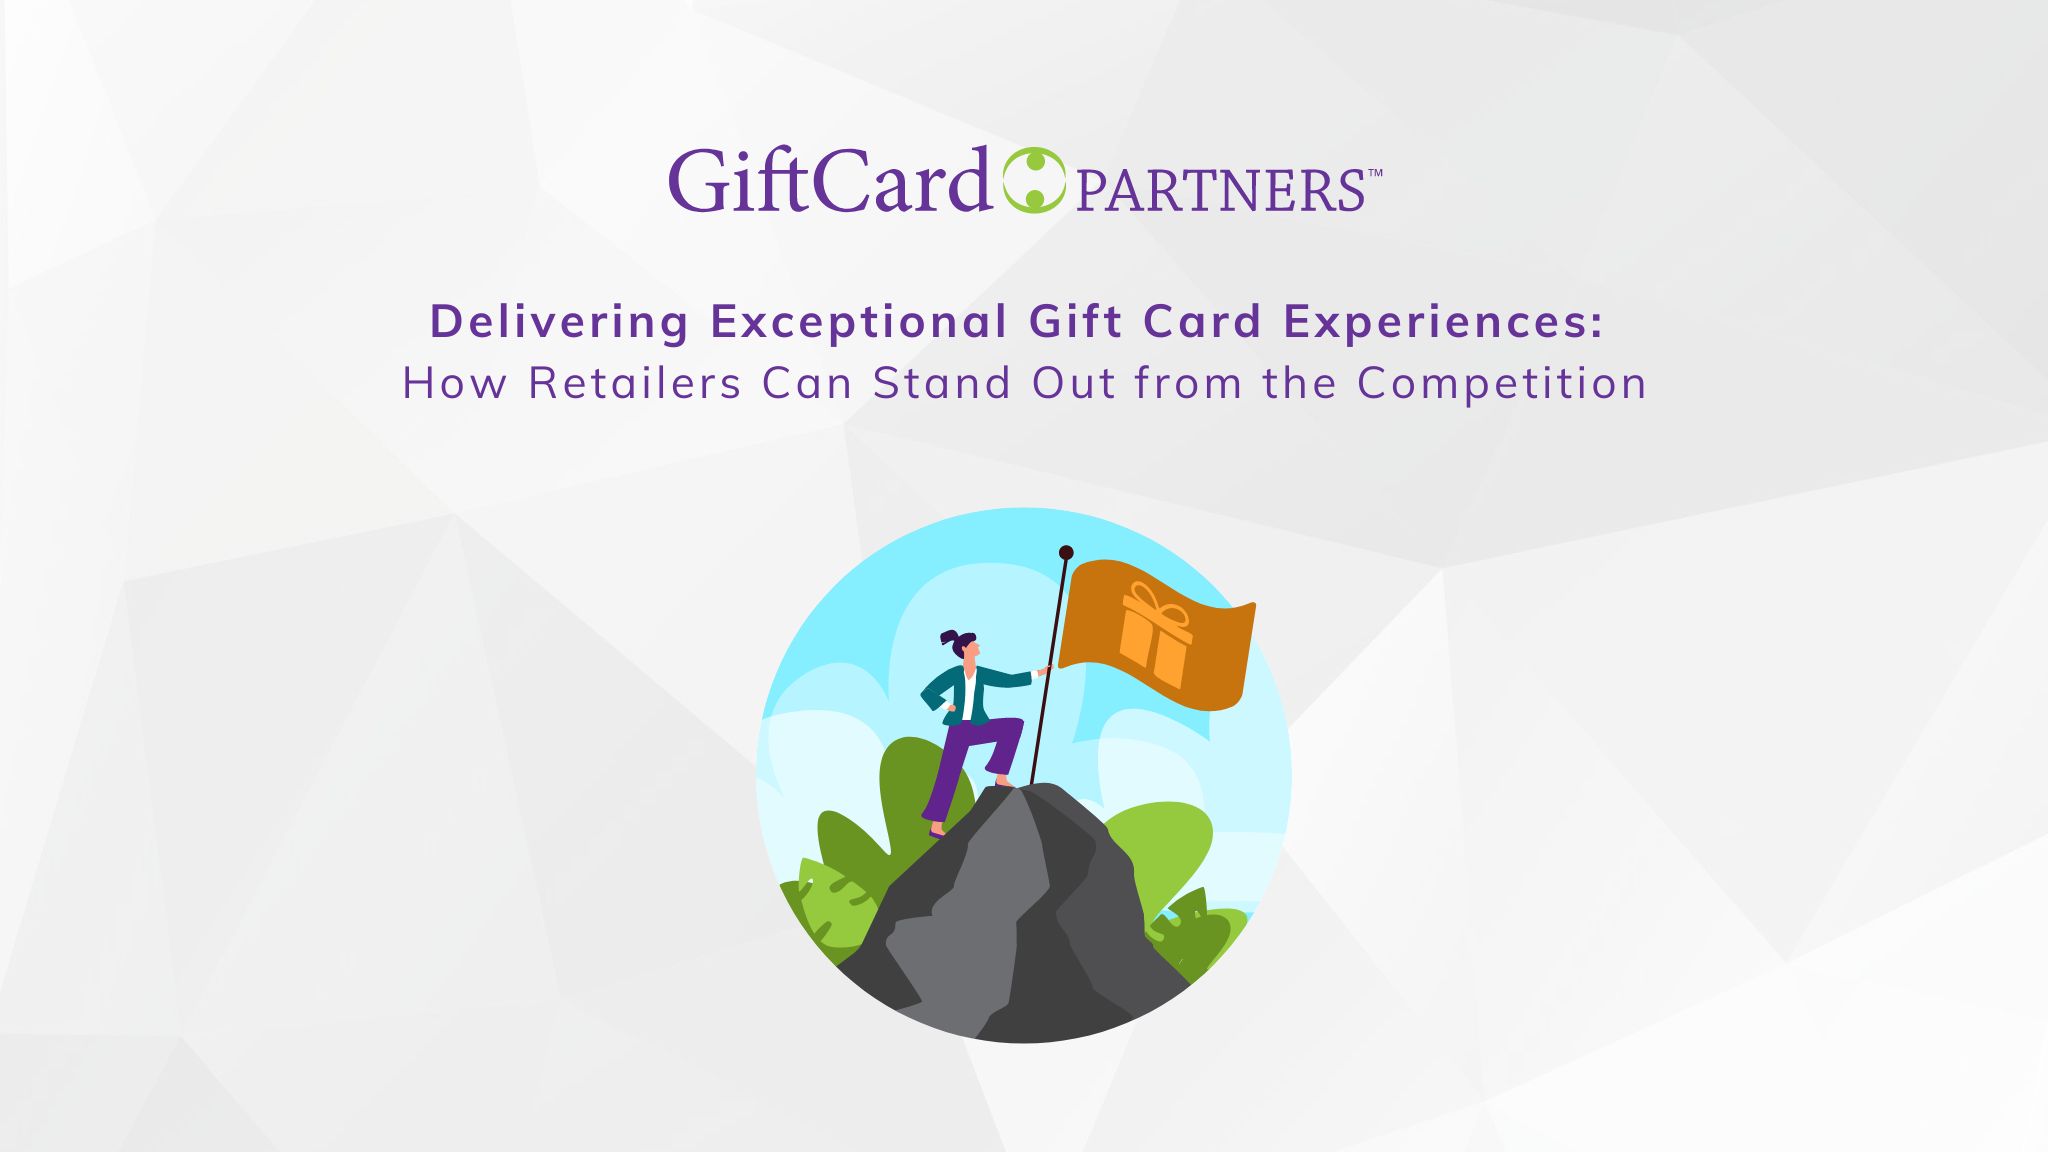 Delivering Exceptional Gift Card Experiences: How Retailers Can Stand Out from the Competition